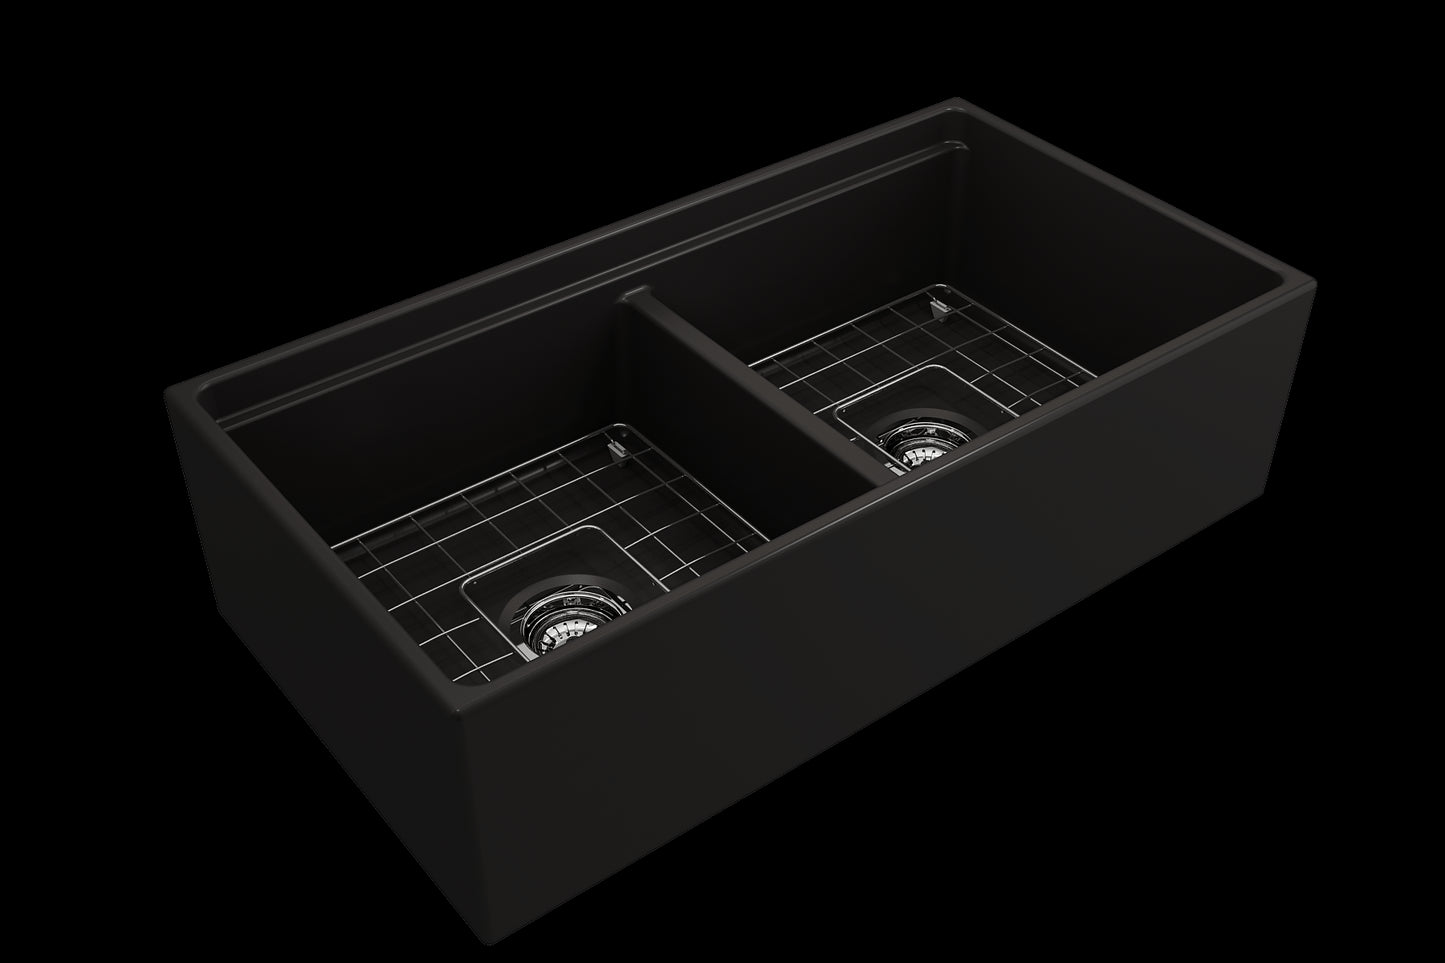 BOCCHI CONTEMPO 36" Step Rim Fireclay Farmhouse Double Bowl Kitchen Sink with Protective Bottom Grid and Strainer - Matte Black